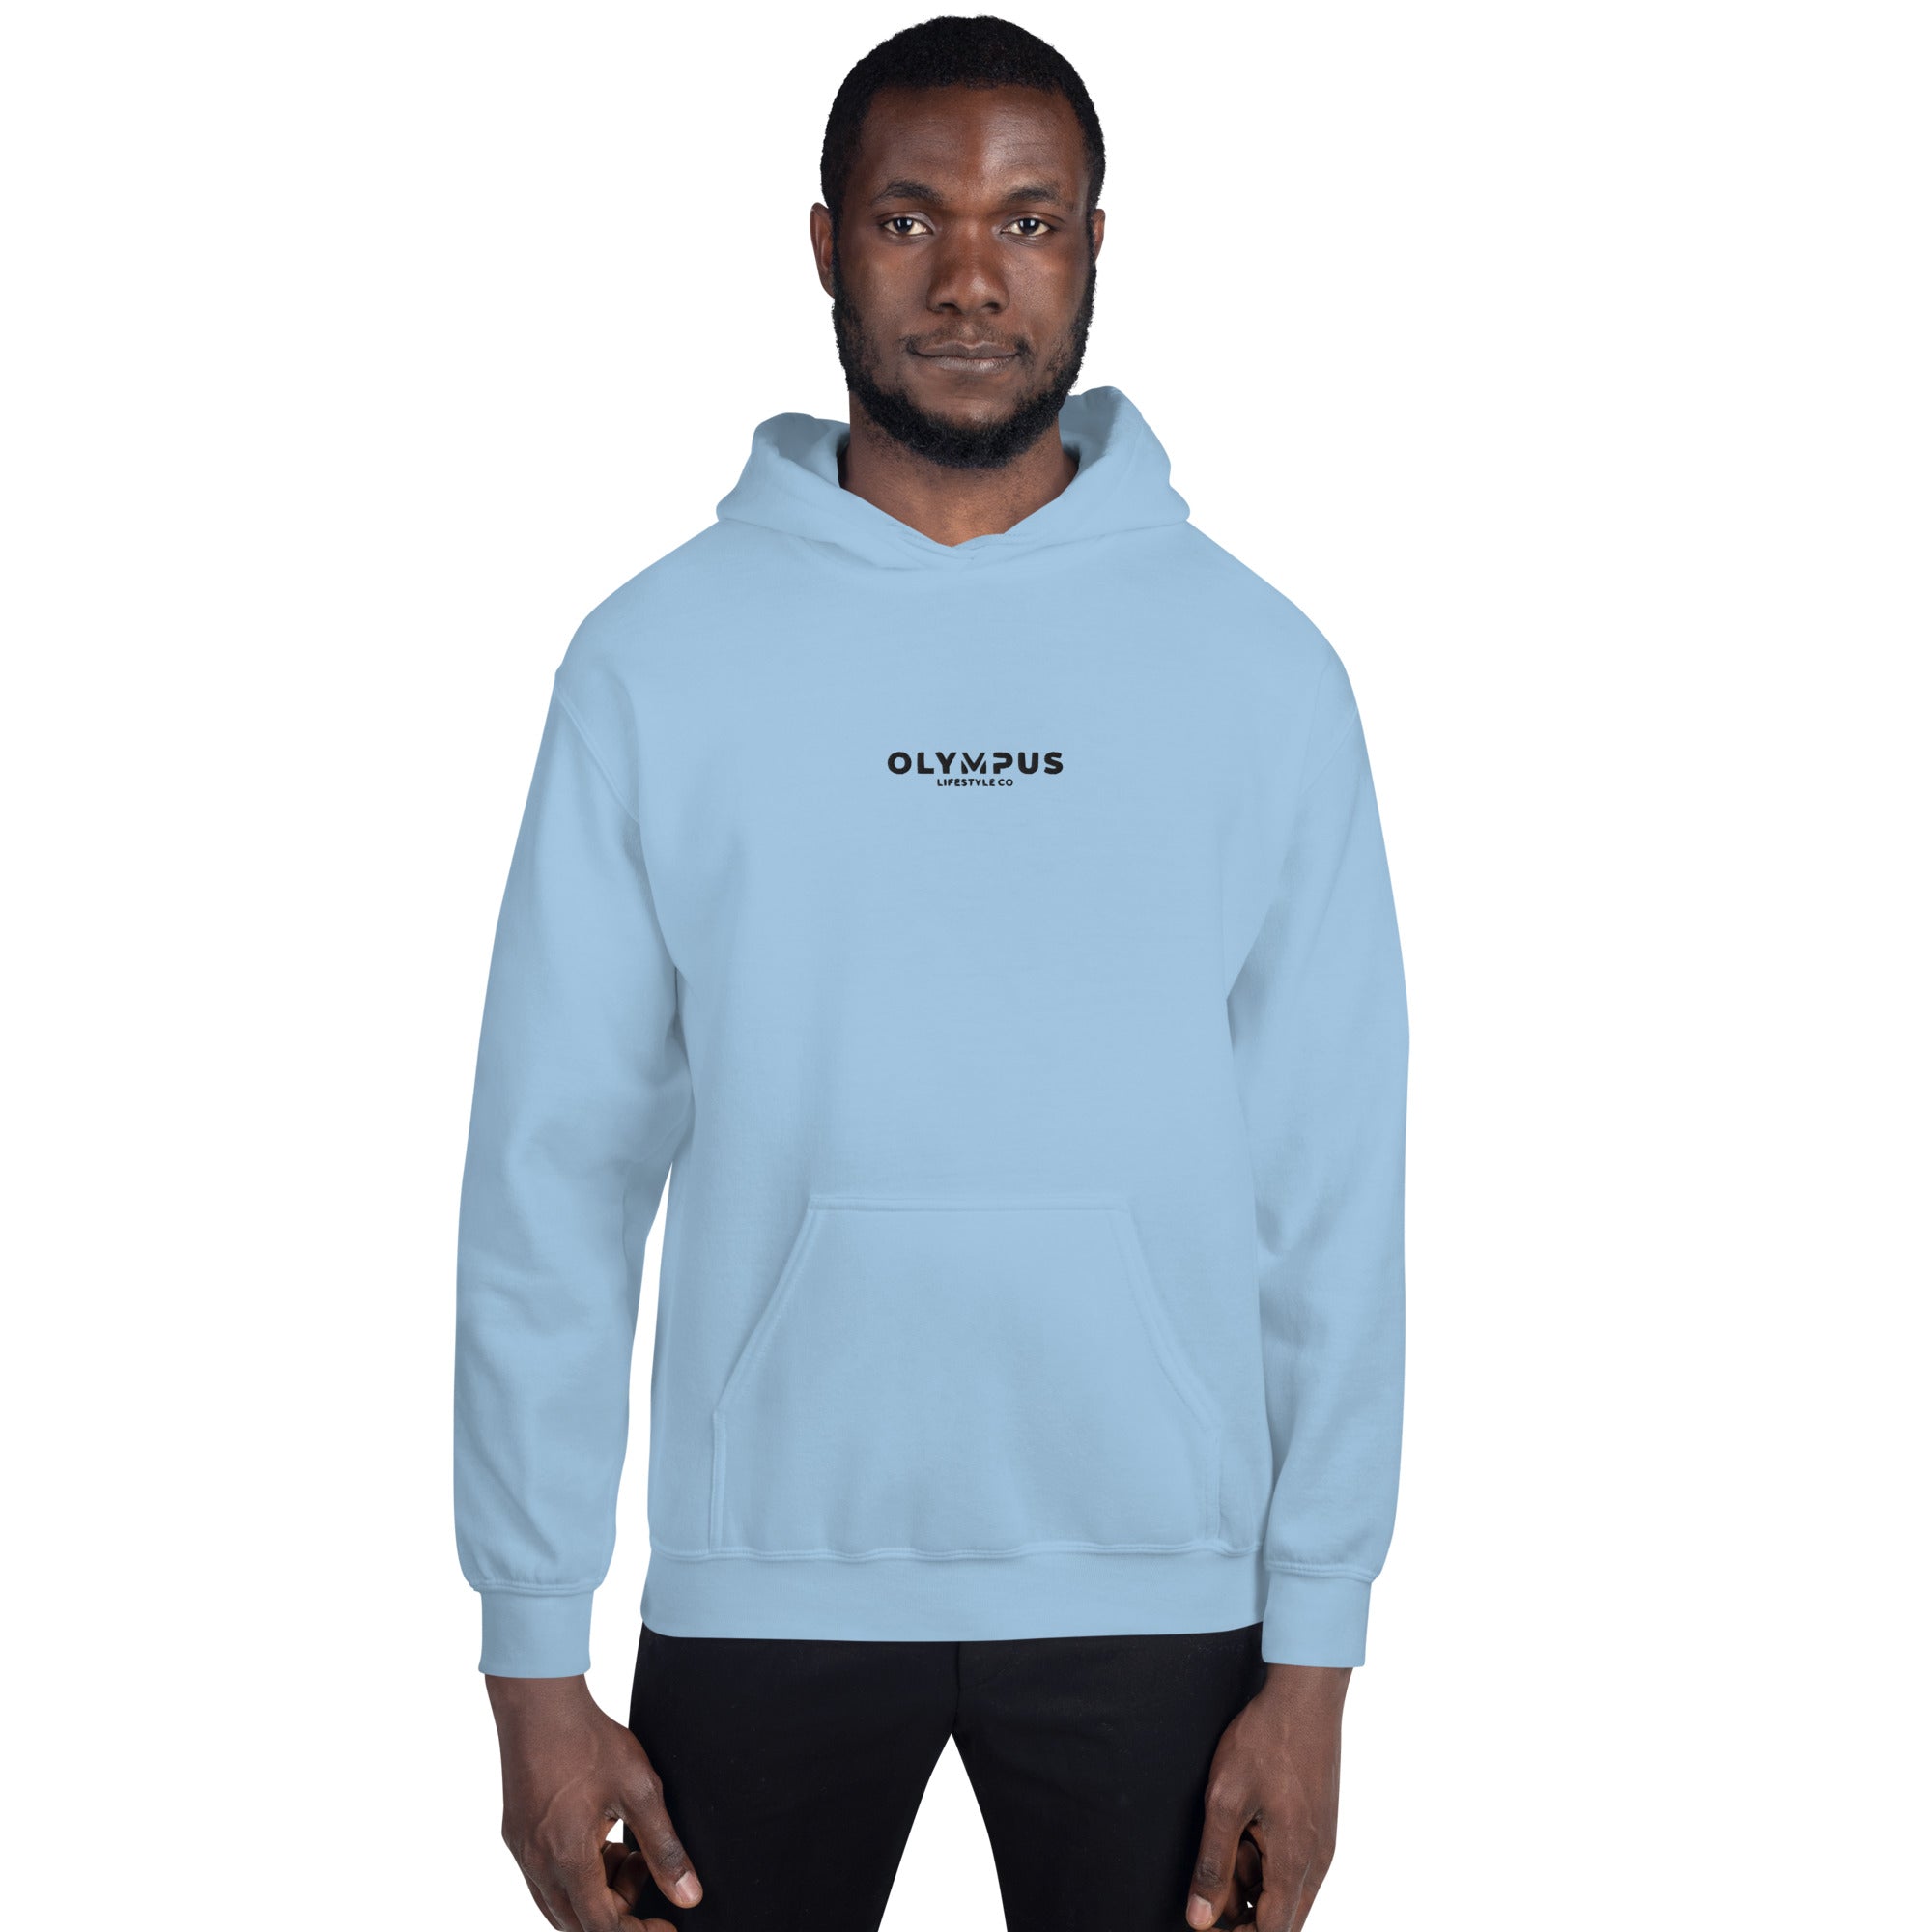 Olympus Men's Embroidered Hoodie Black Text Logo